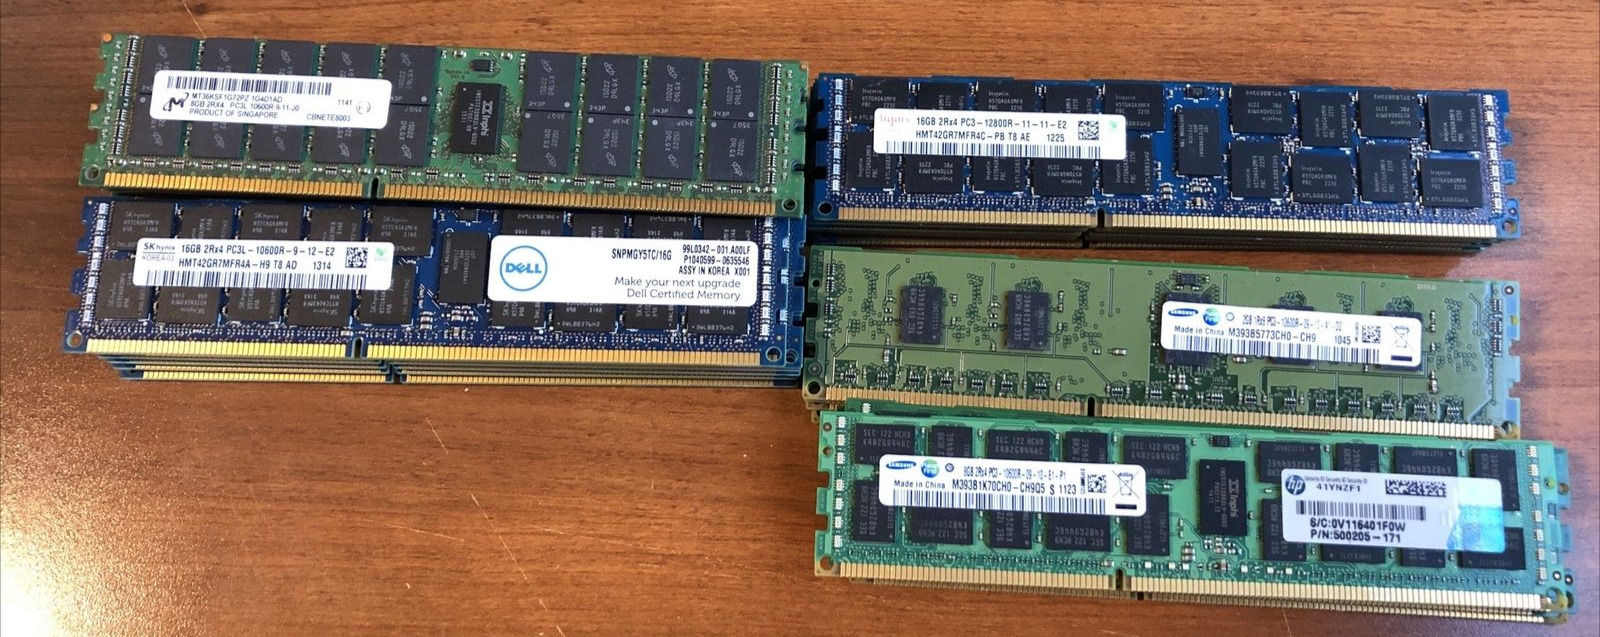 Lot of 34 - PC3 PC3L DDR3 Mixed Brand Mixed Speed Server RAM